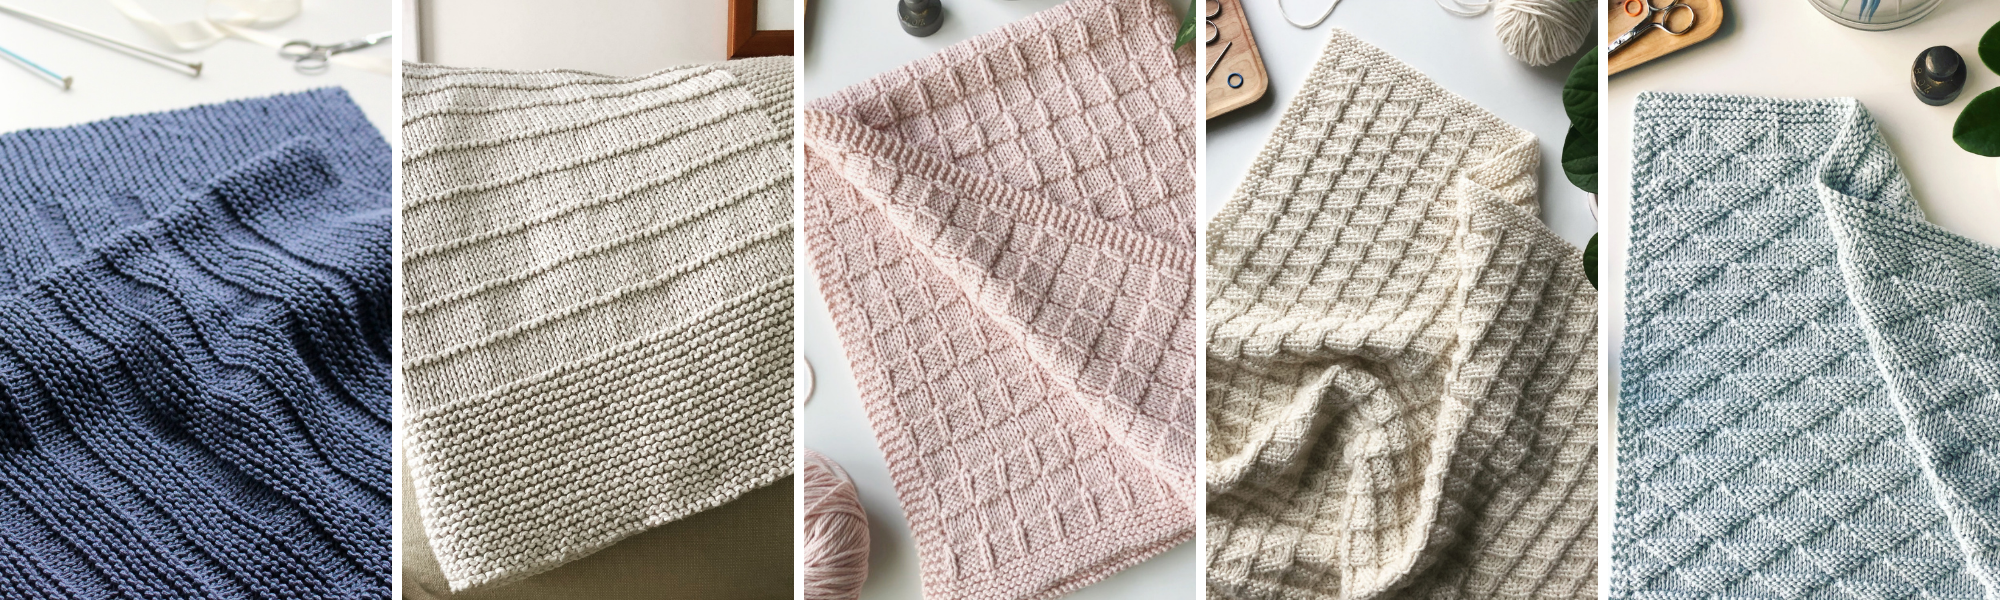 Every Now and Then Chunky Striped Blanket Knitting Pattern for